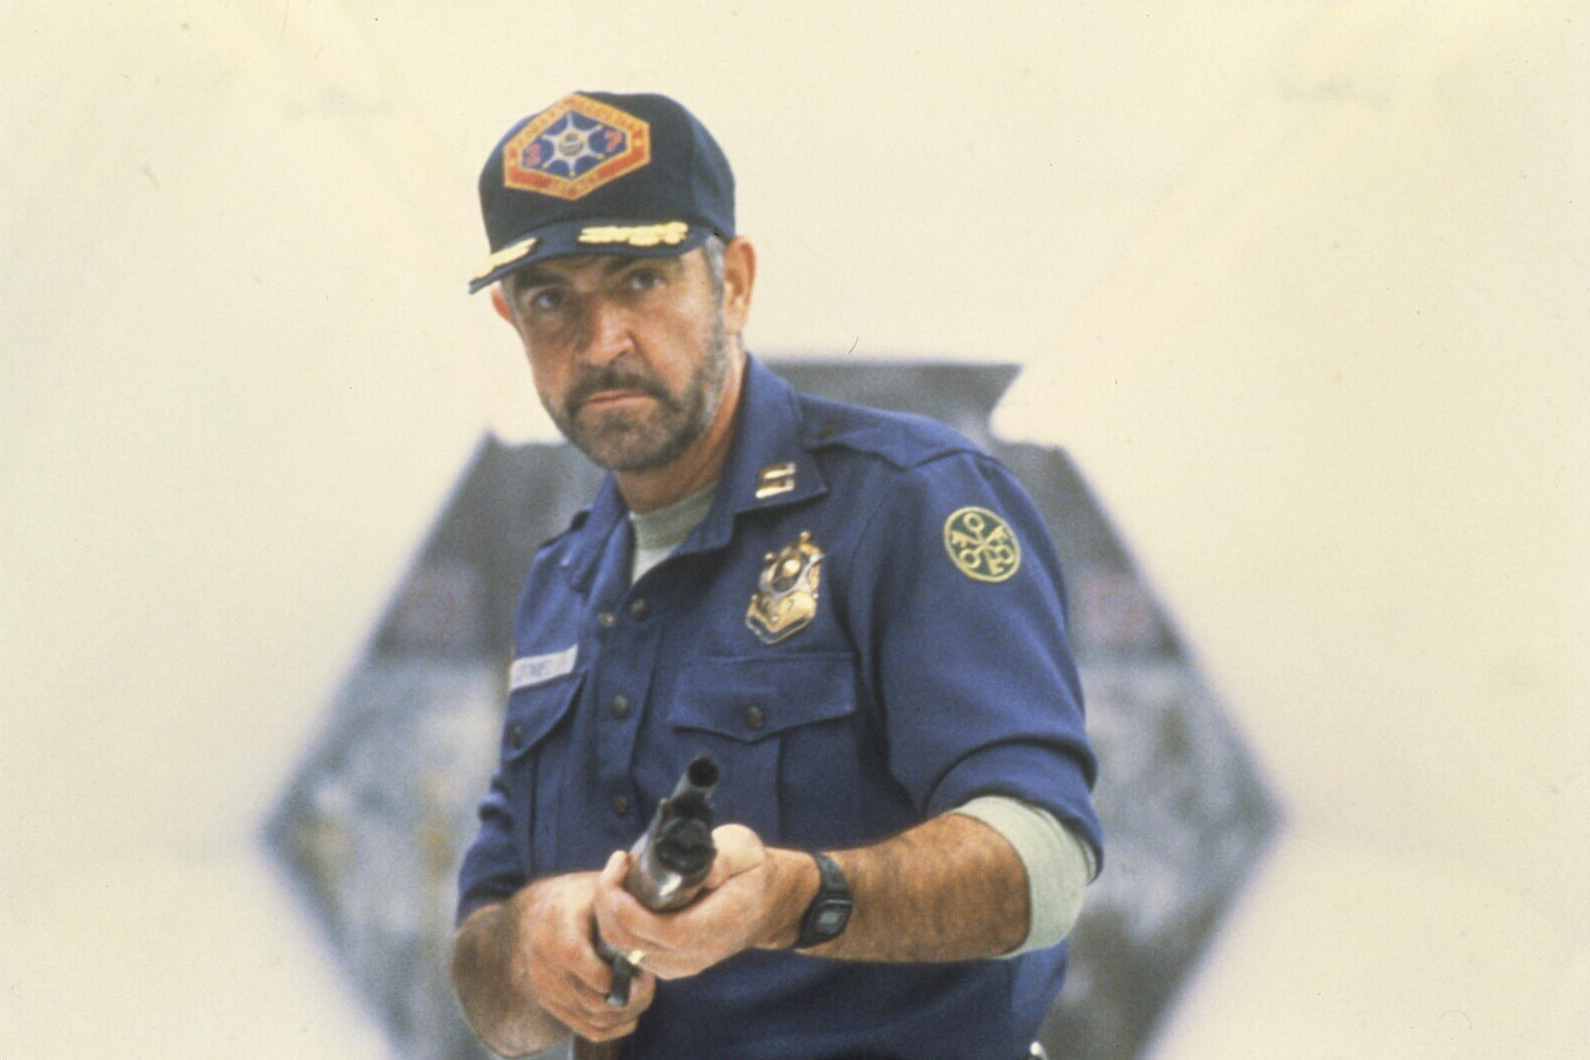 Sean Connery in Outland (1981)